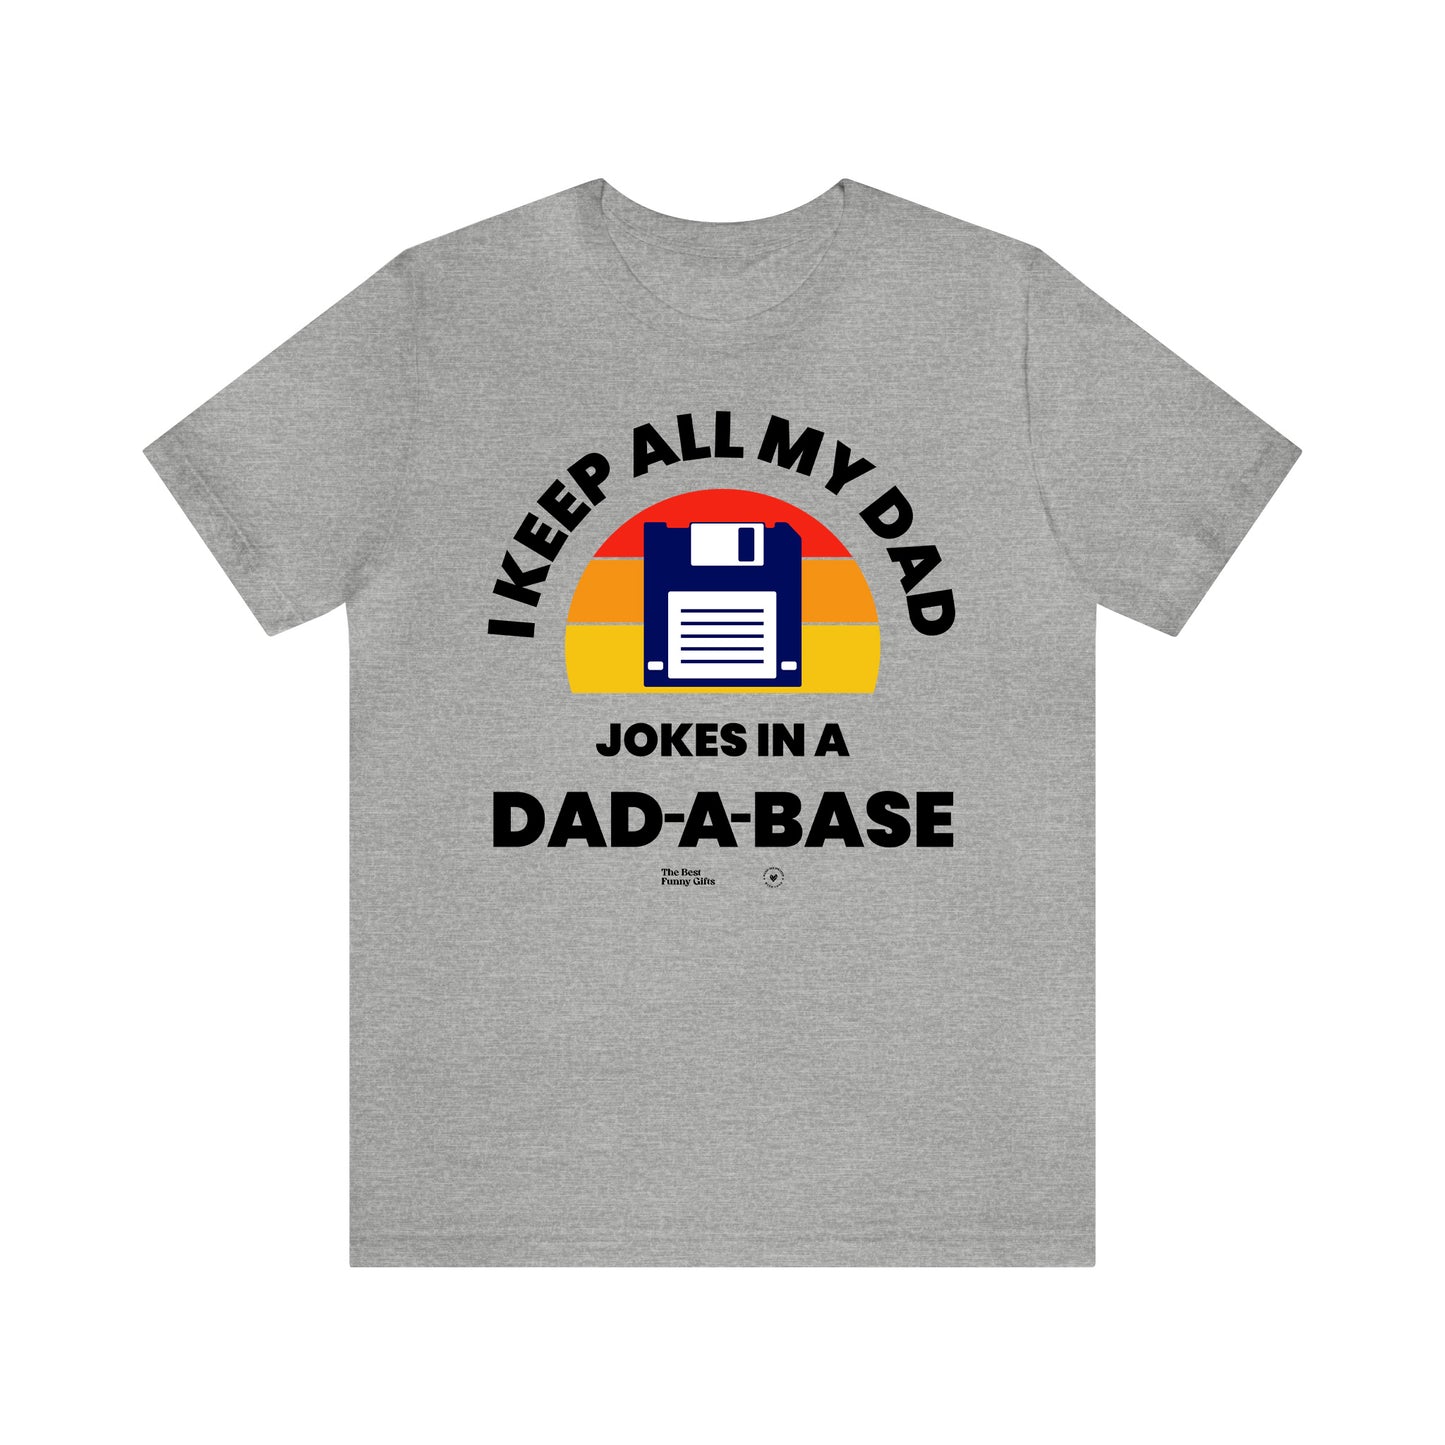 Mens T Shirts - I Keep All My Dad Jokes in a Dad a Base - Funny Men T Shirts